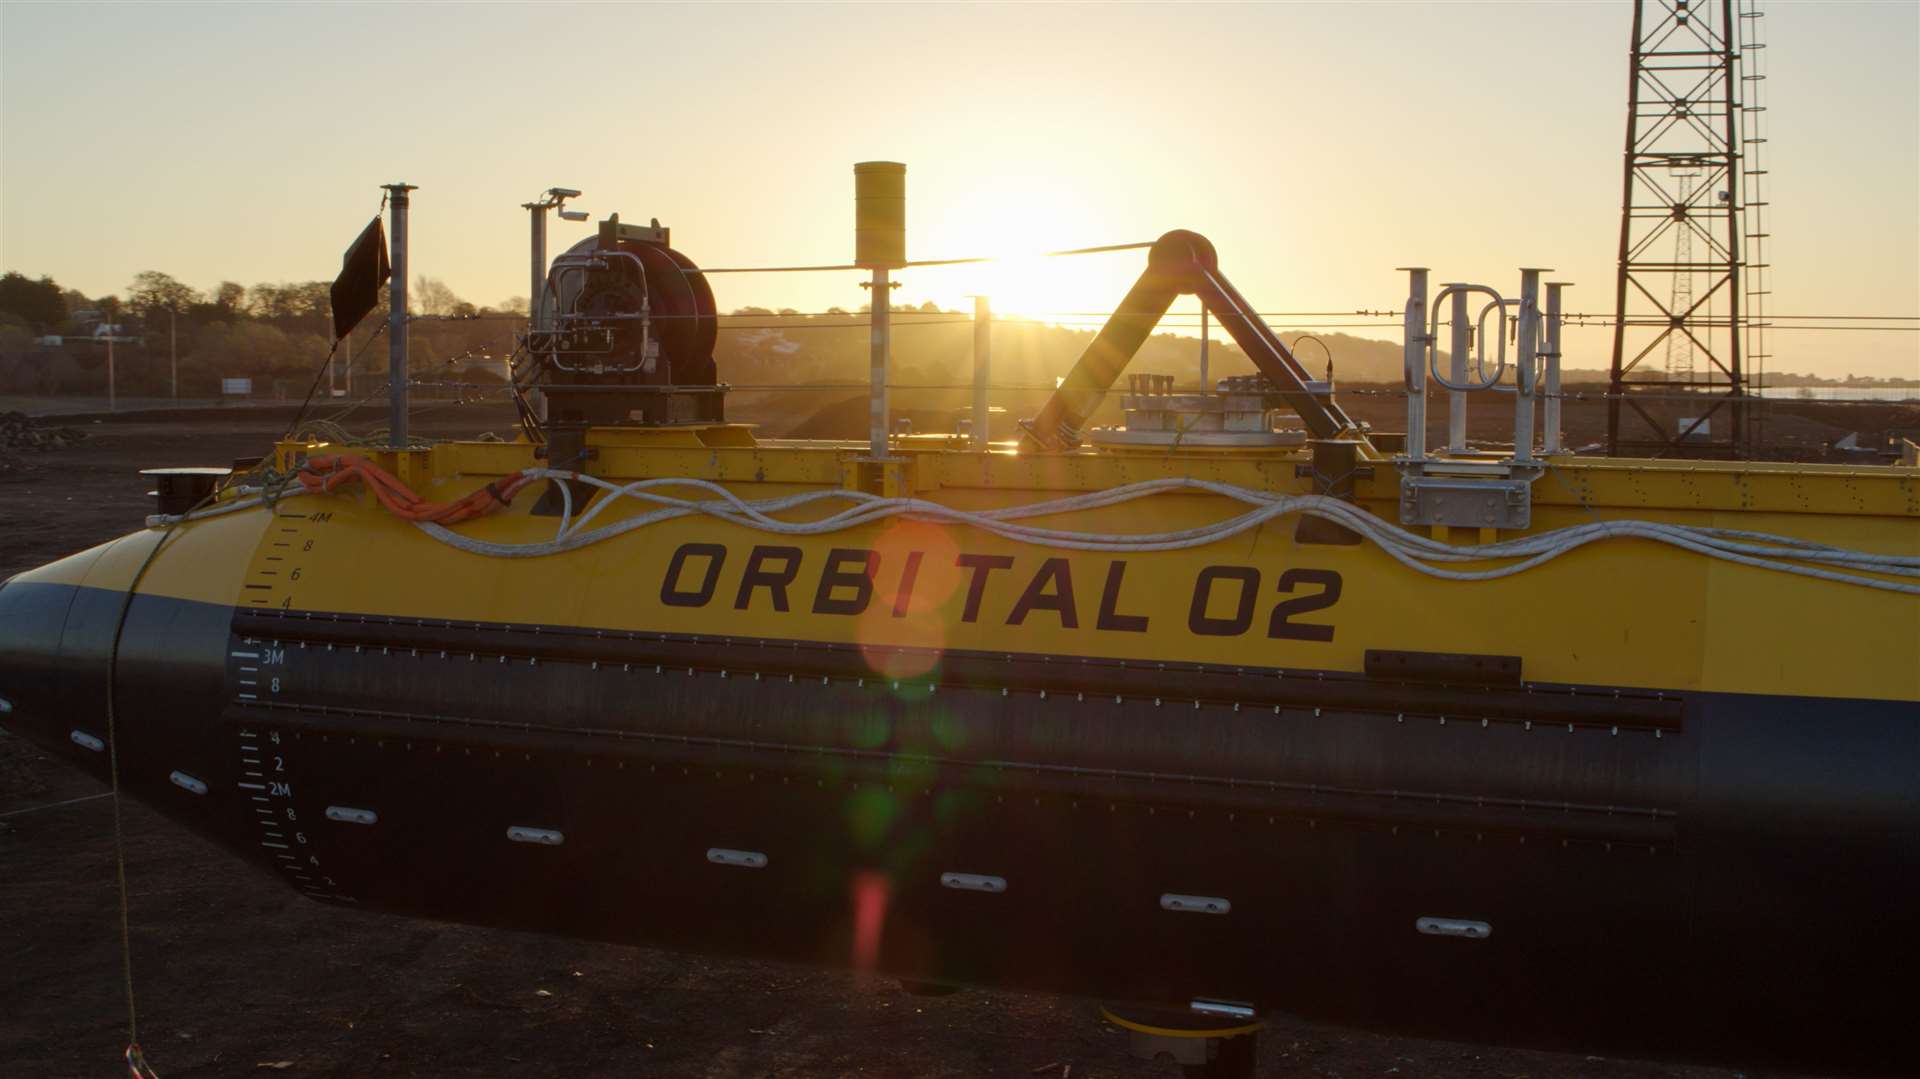 The Orbital O2 tidal turbine is now carrying out tests at EMEC's Orkney test site.